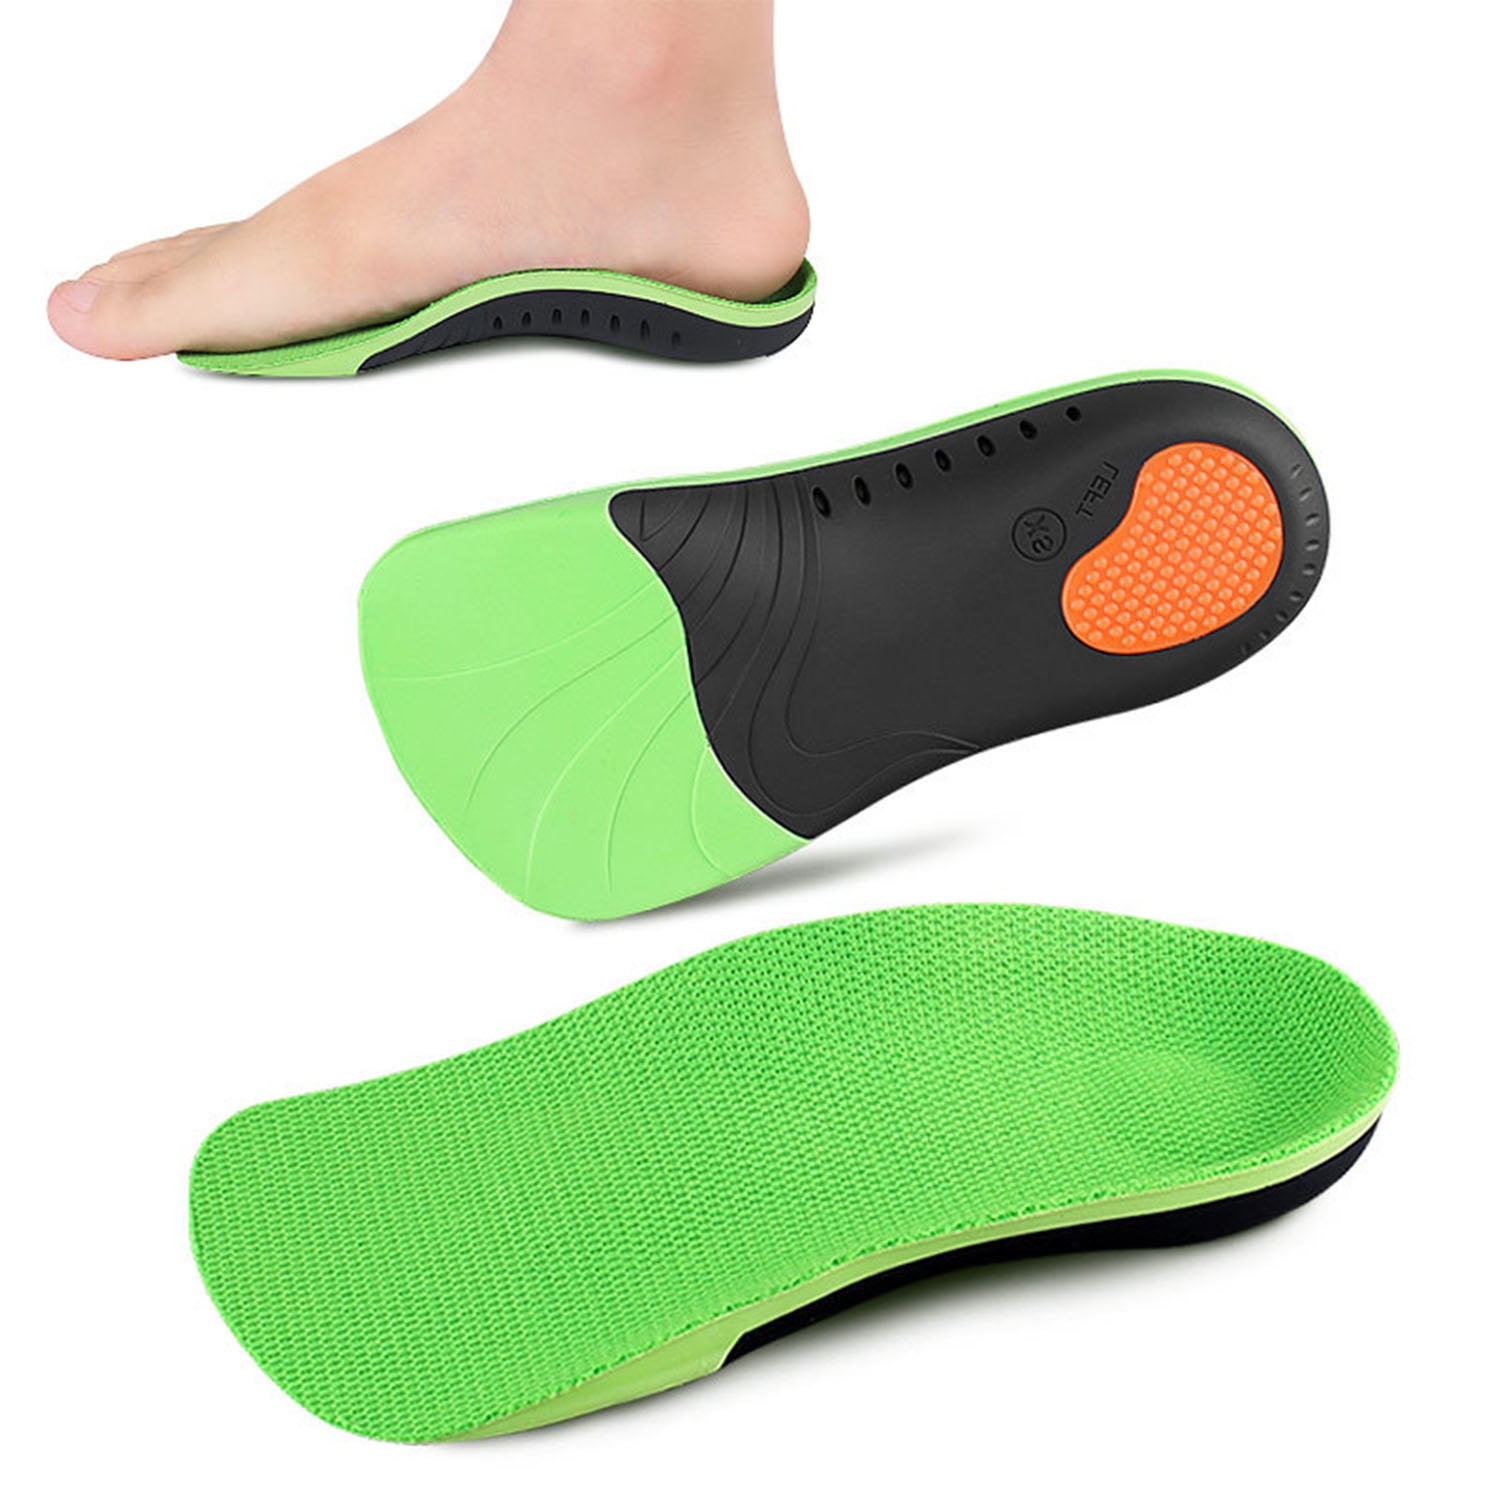 flat feet Heel Cup- pronation fallen arches 3/4 Orthotic Insoles Arch Support 